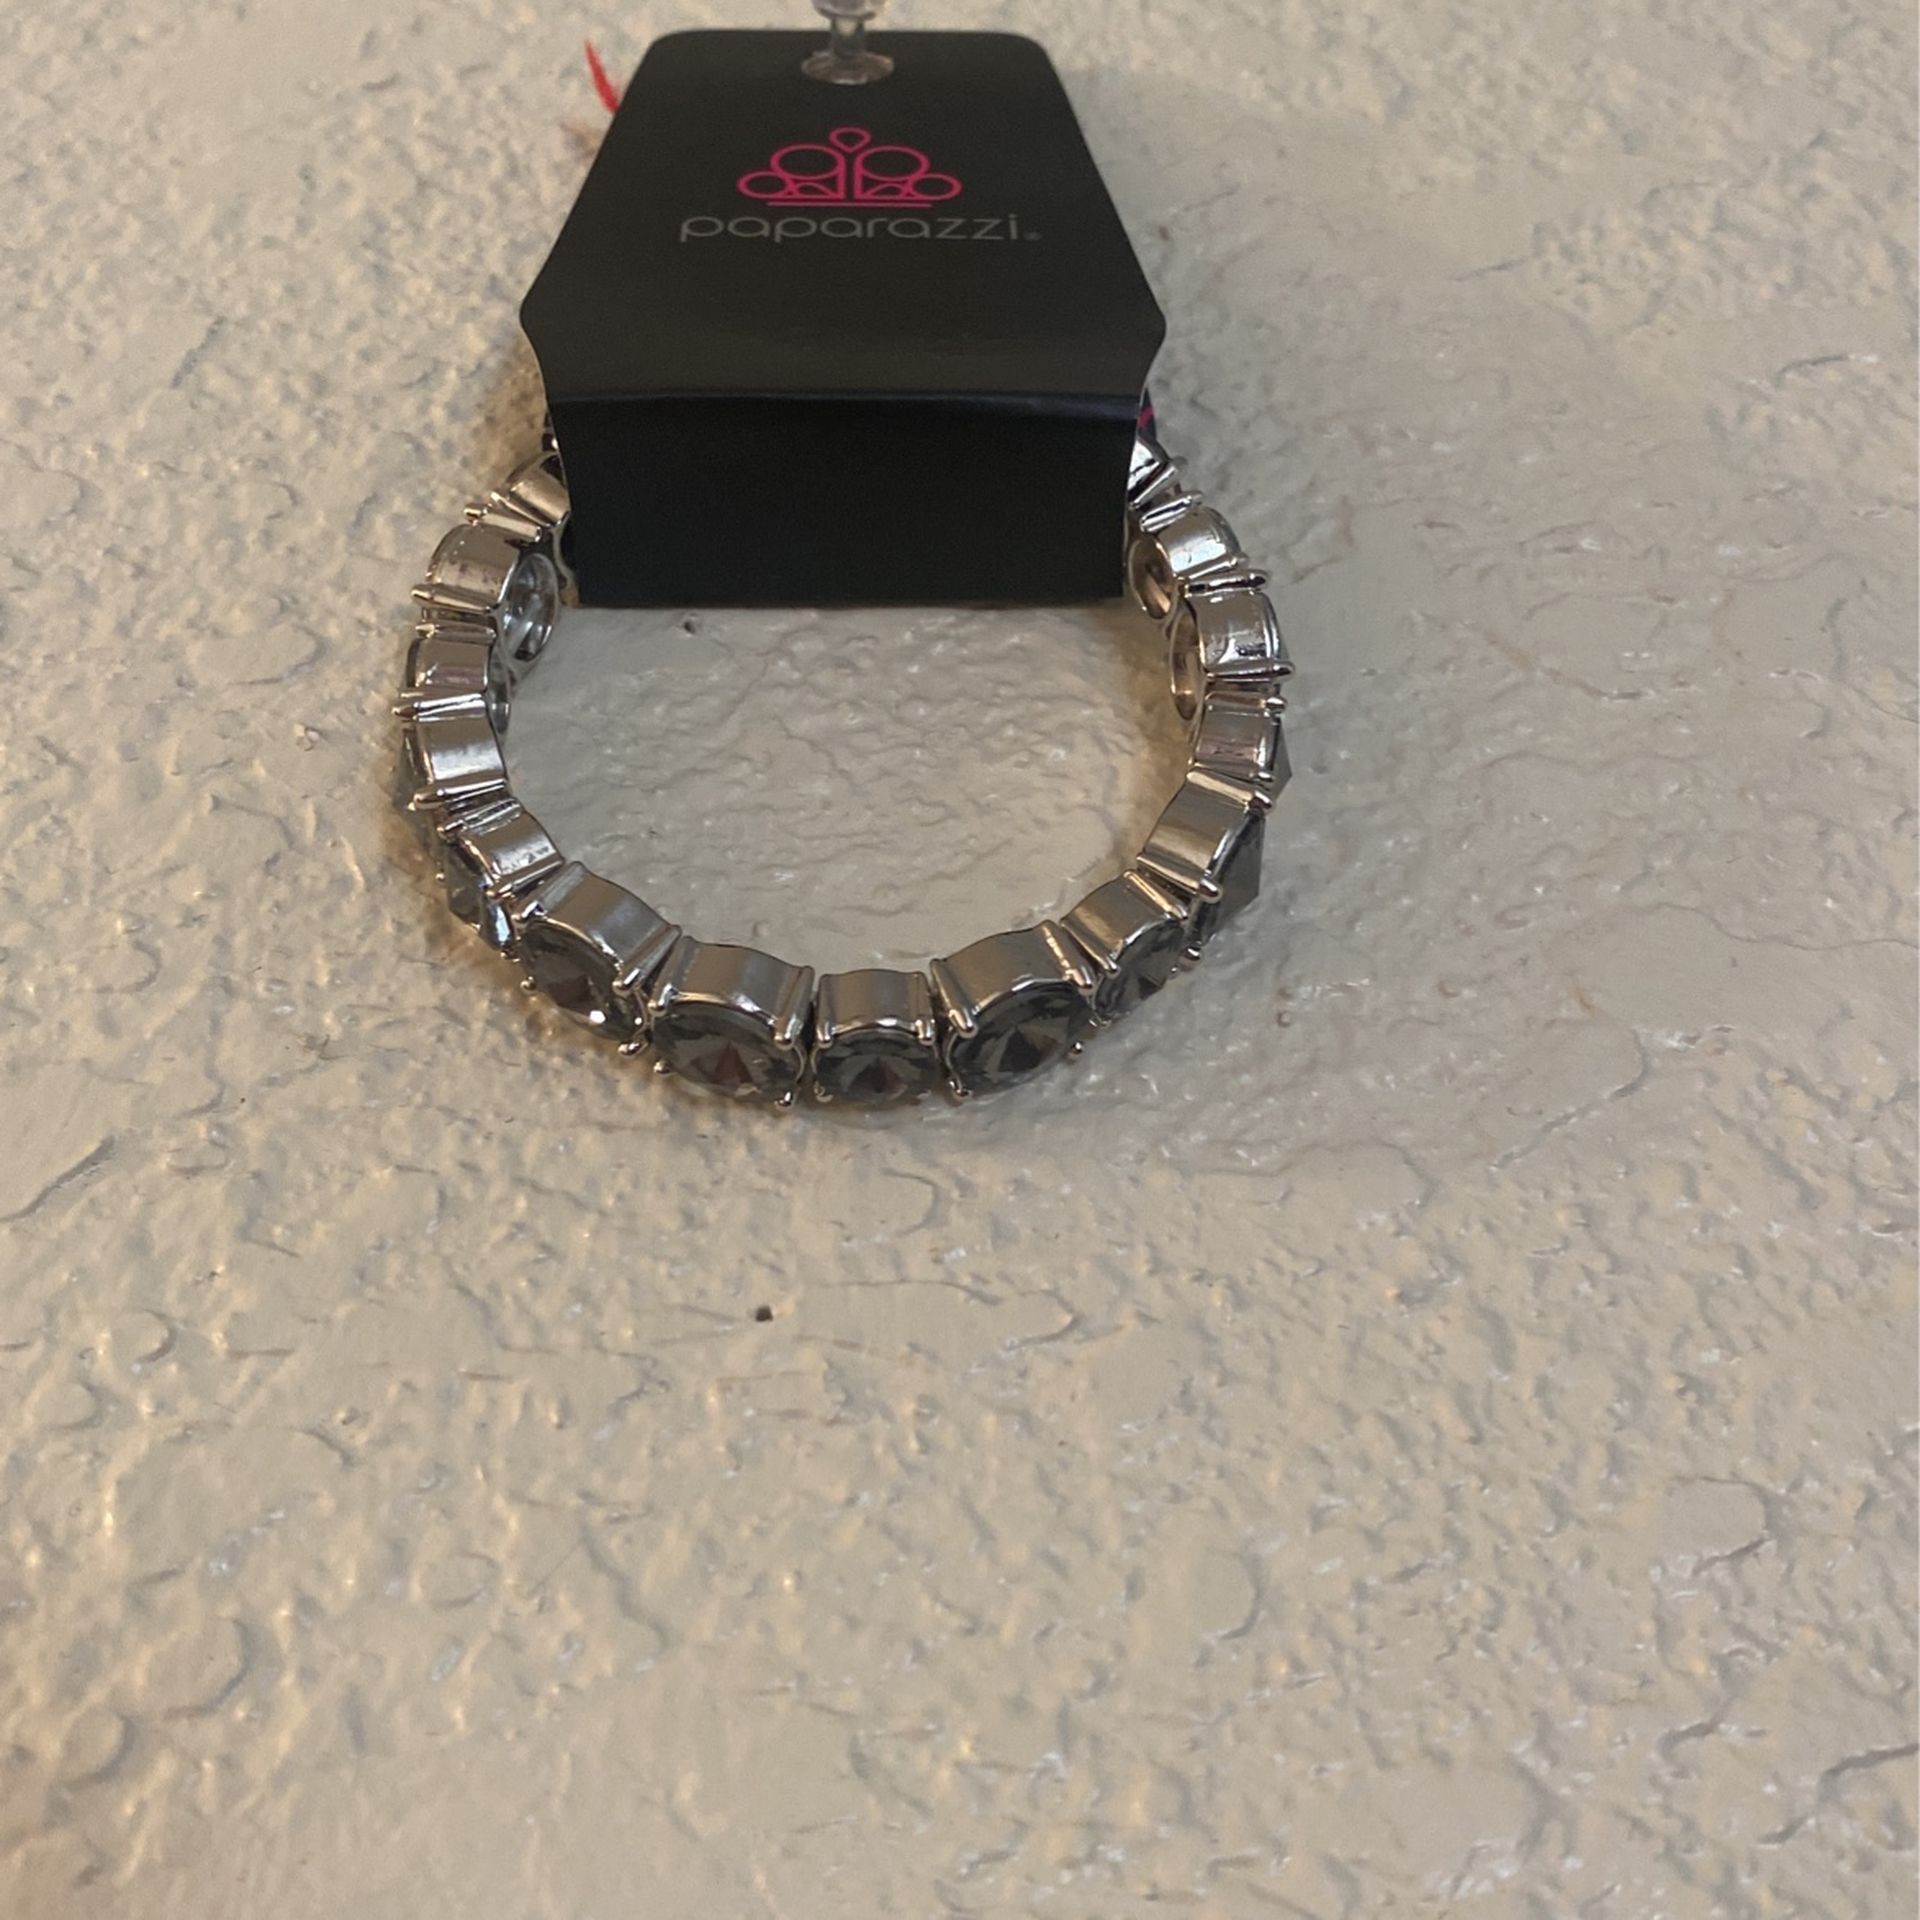 Stretch band bracelet absolutely adorable with gray rhinestones